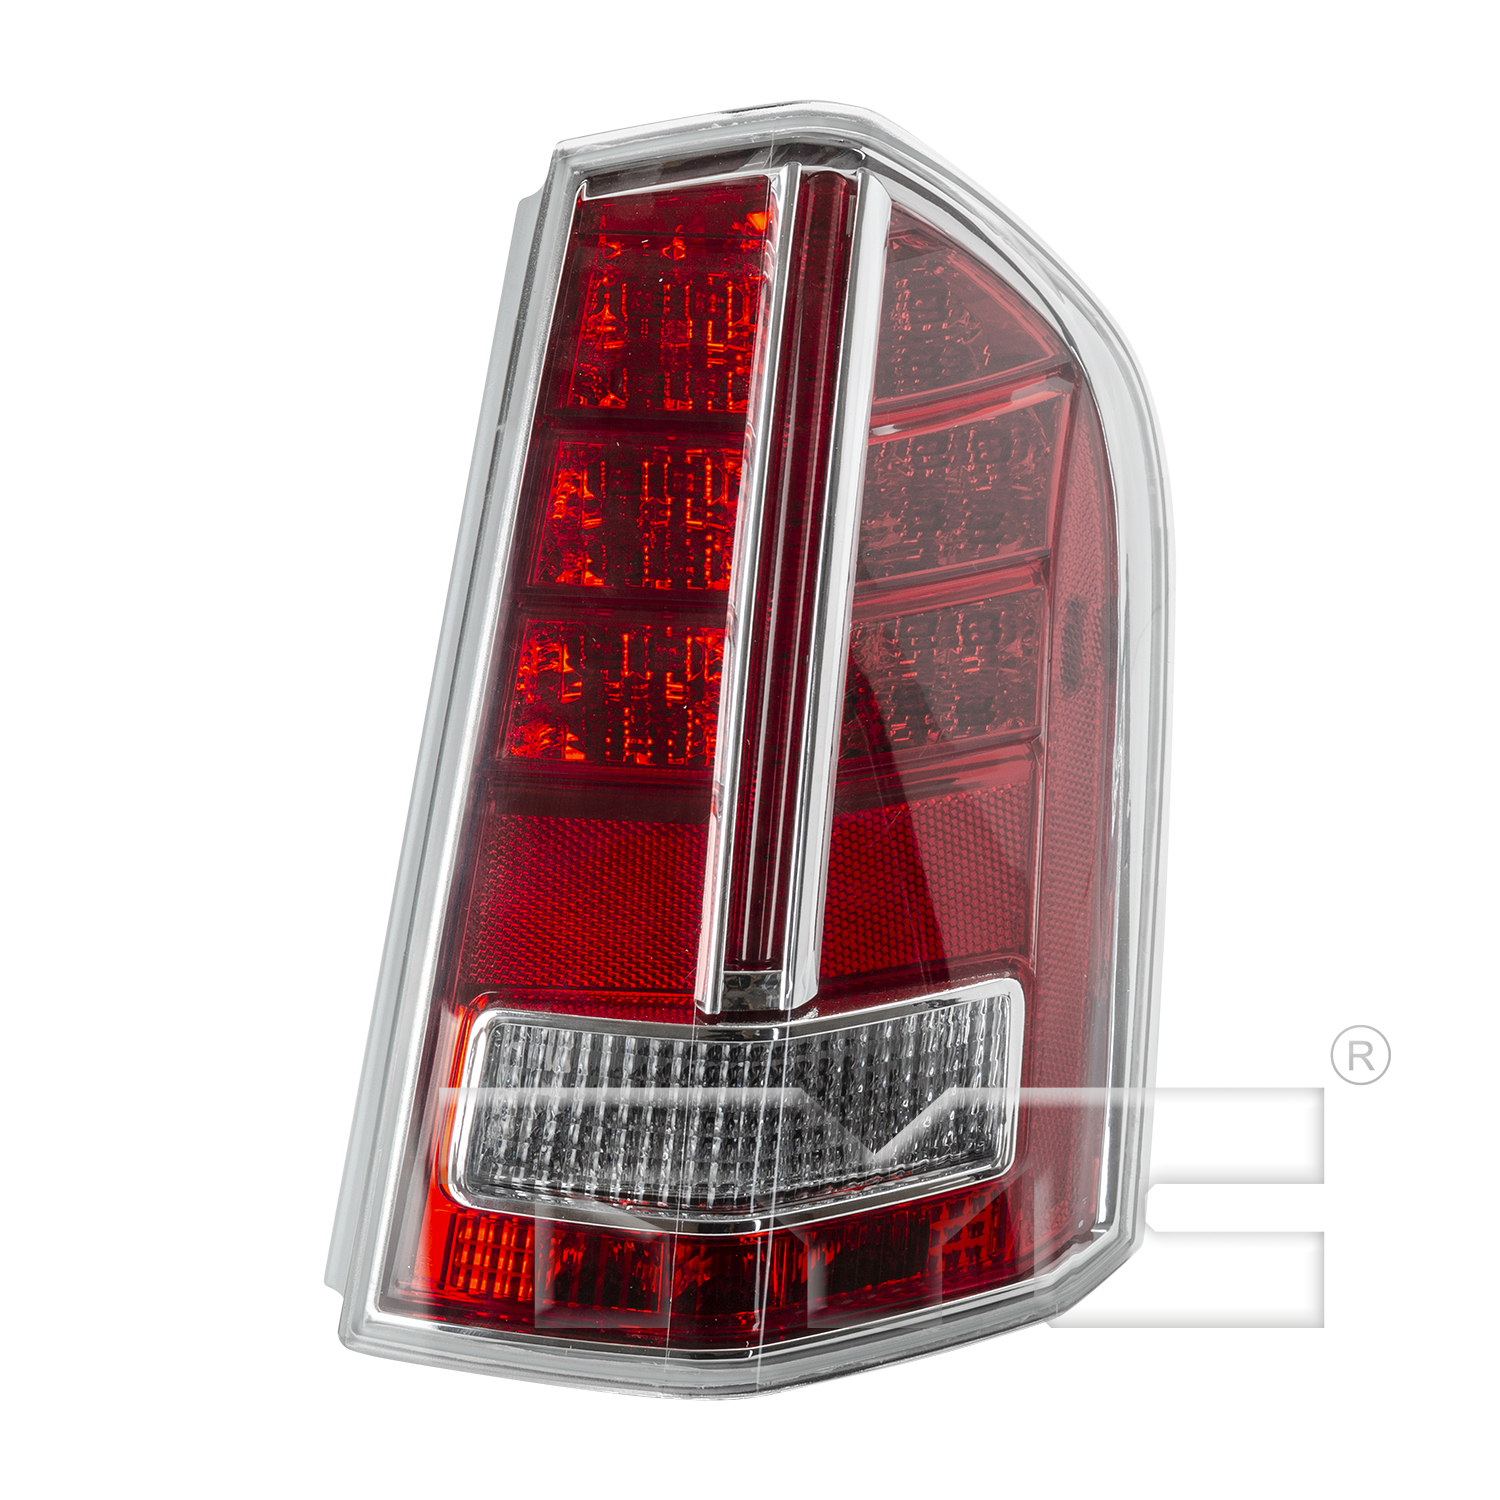 Aftermarket TAILLIGHTS for CHRYSLER - 300, 300,12-14,RT Taillamp lens/housing